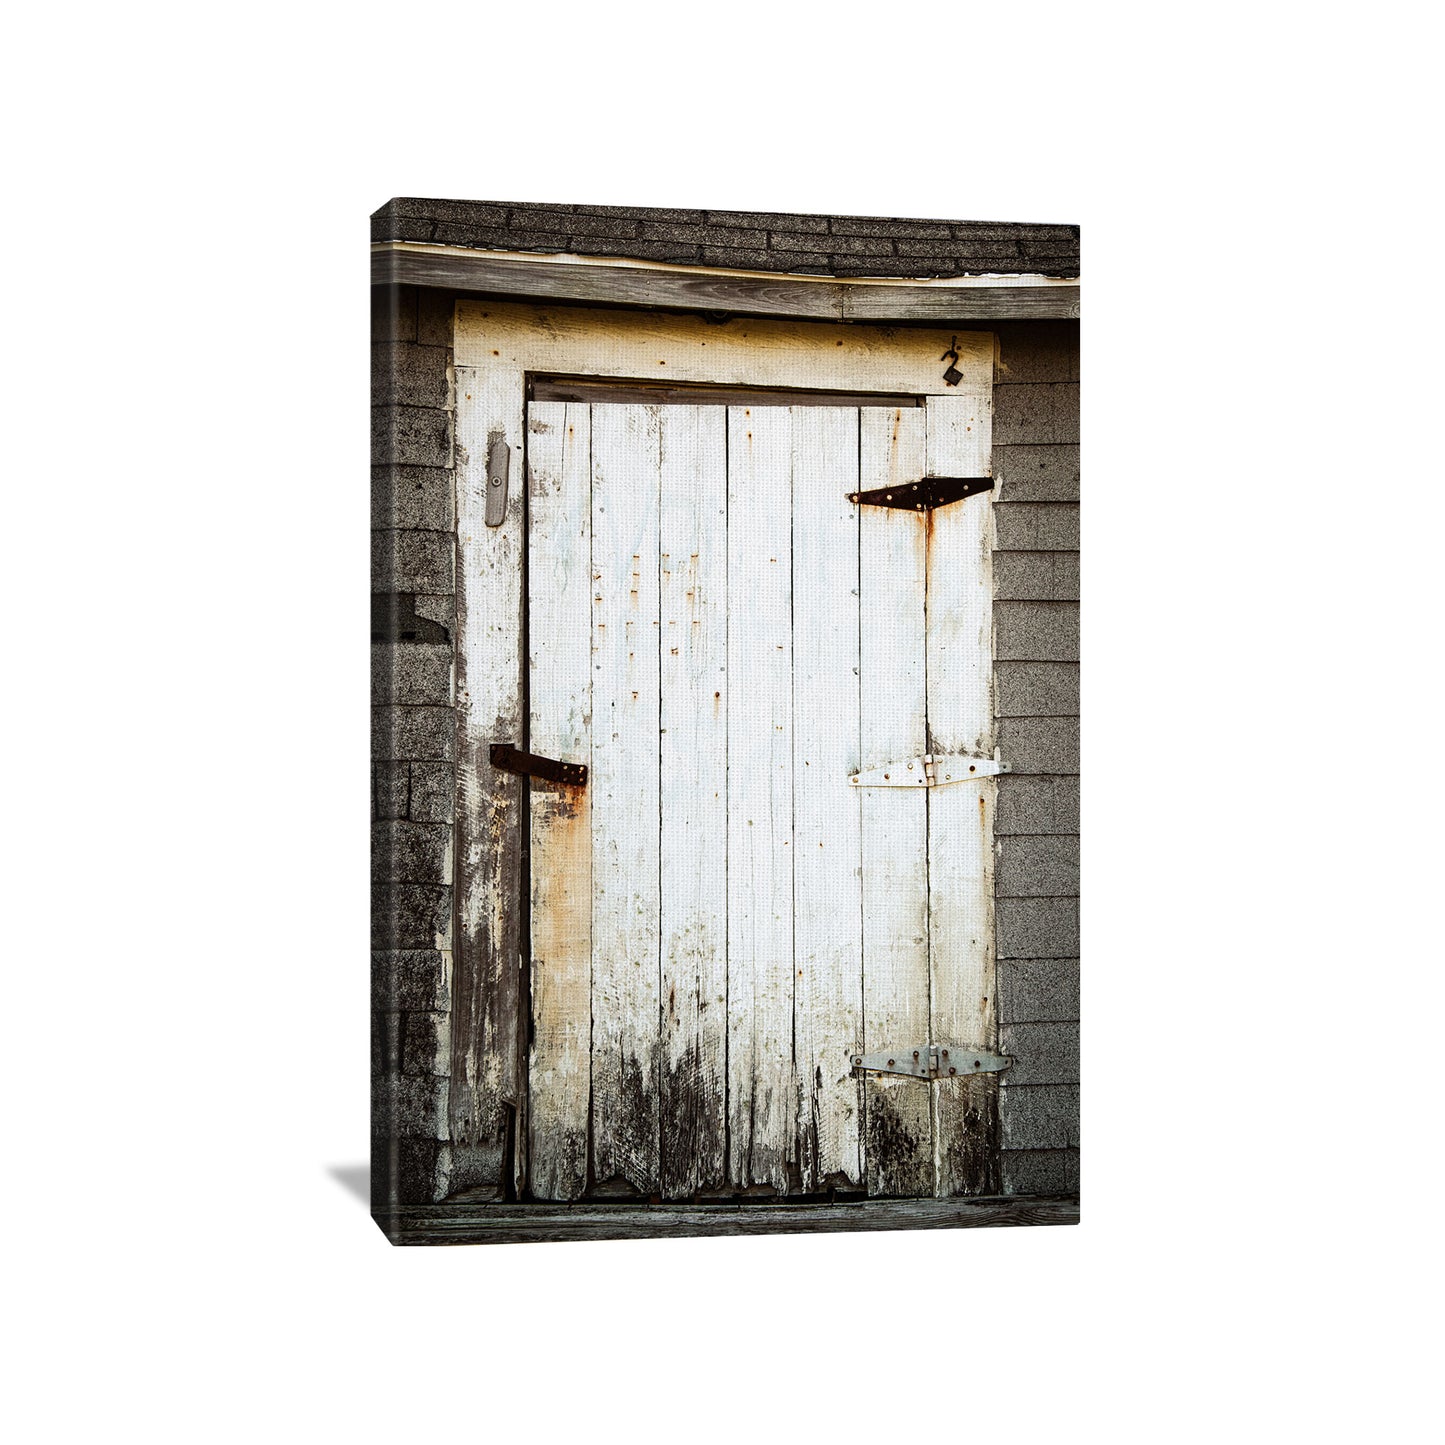 Canvas print capturing the rustic allure of a weathered shack door, symbolizing the beauty in the passing of time, showcased on a 3/4" deep canvas.